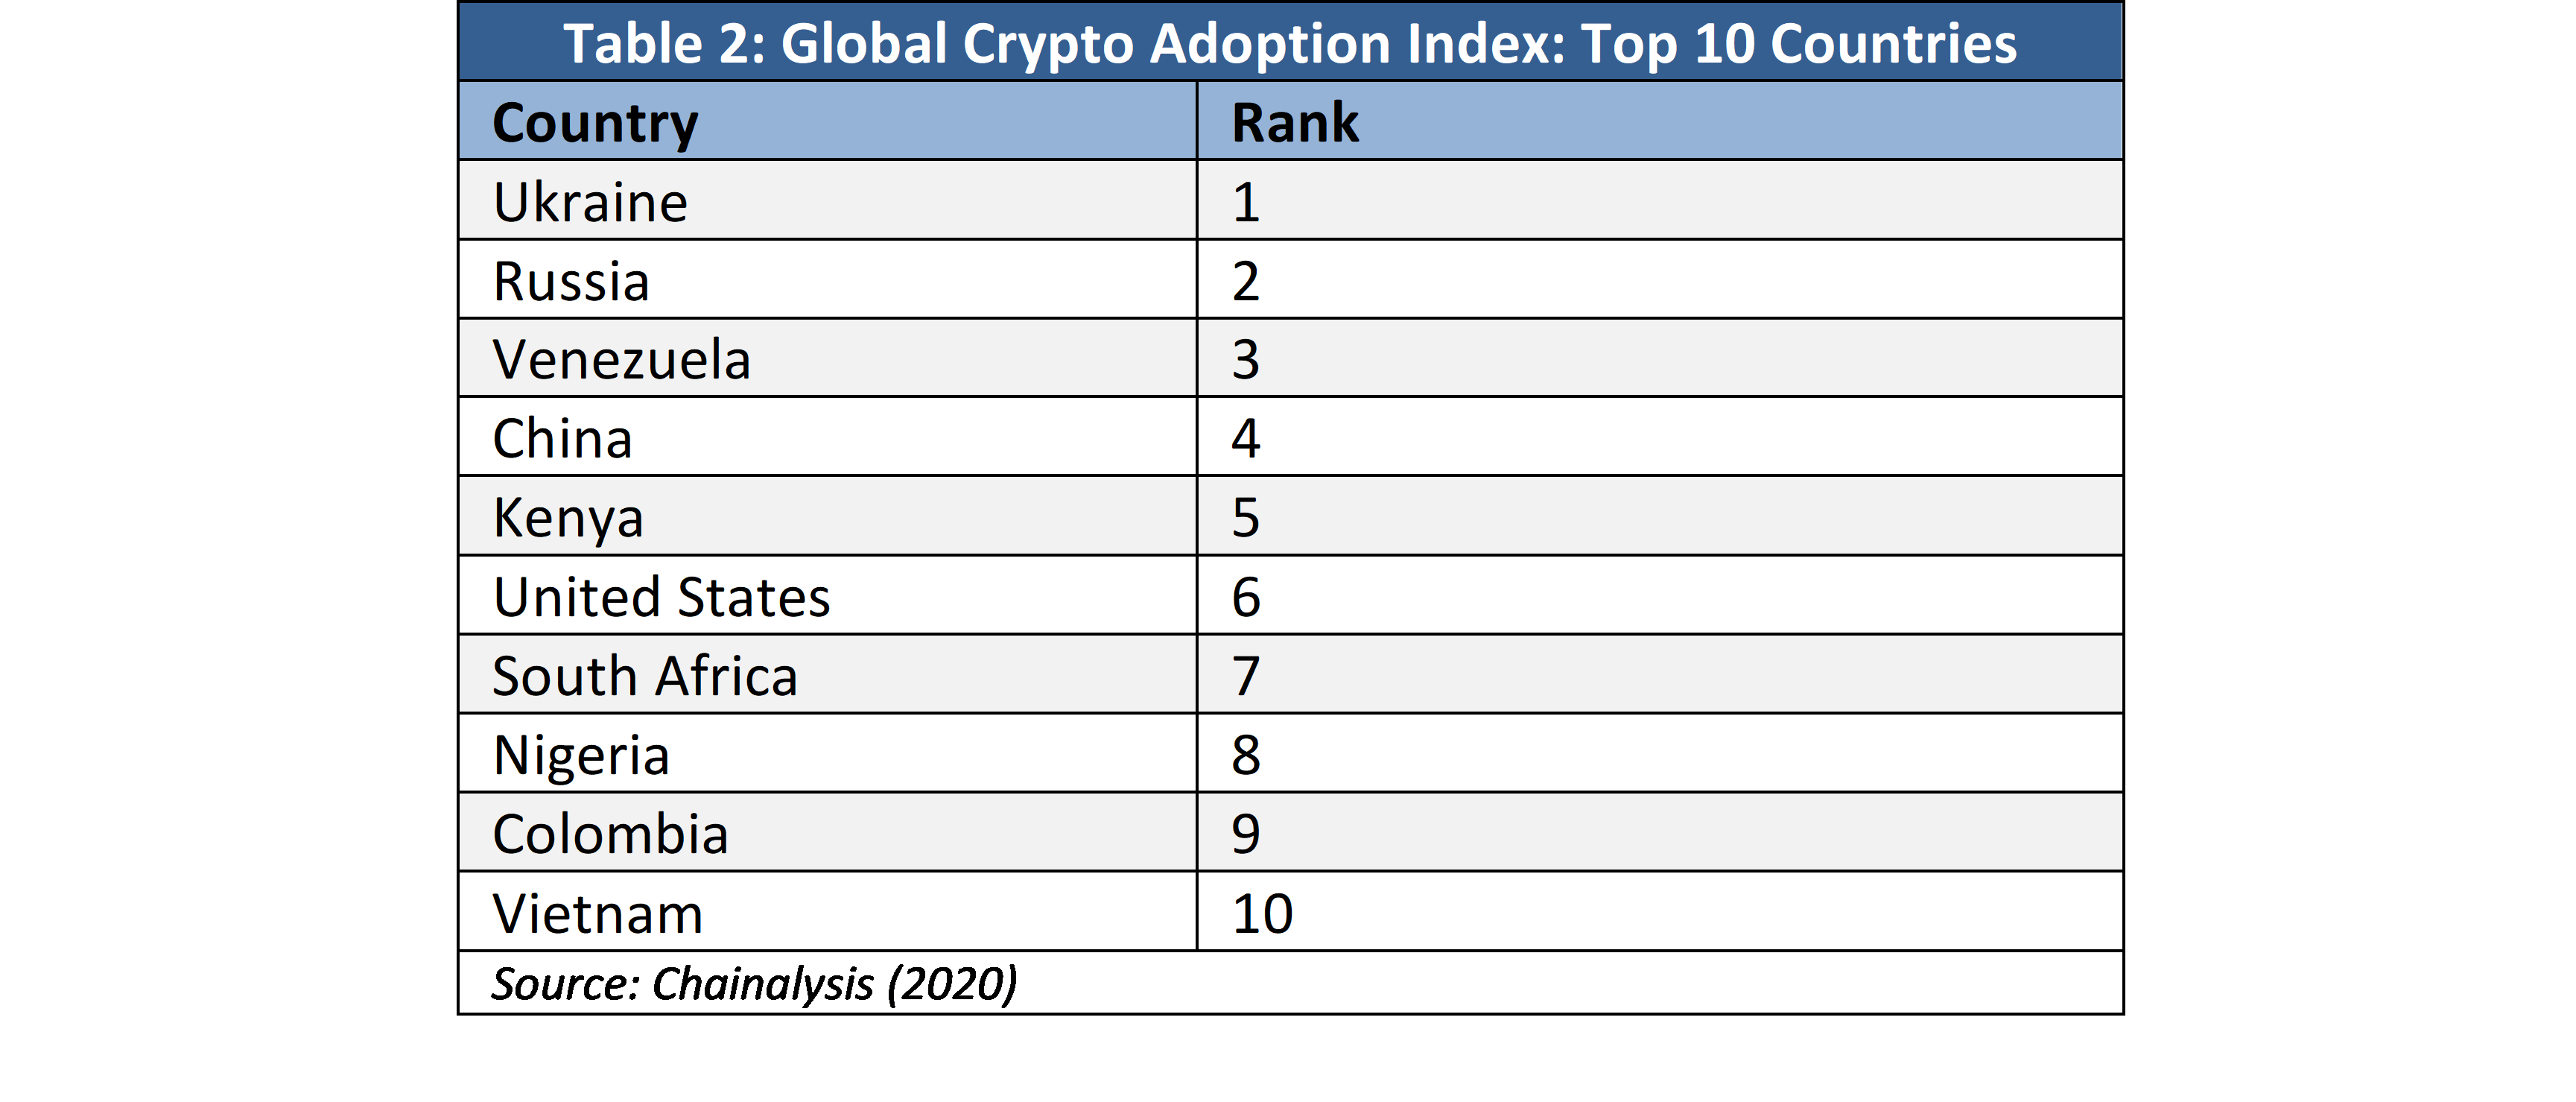 Table of Global Crypto Adoption Index: Top 10 Countries